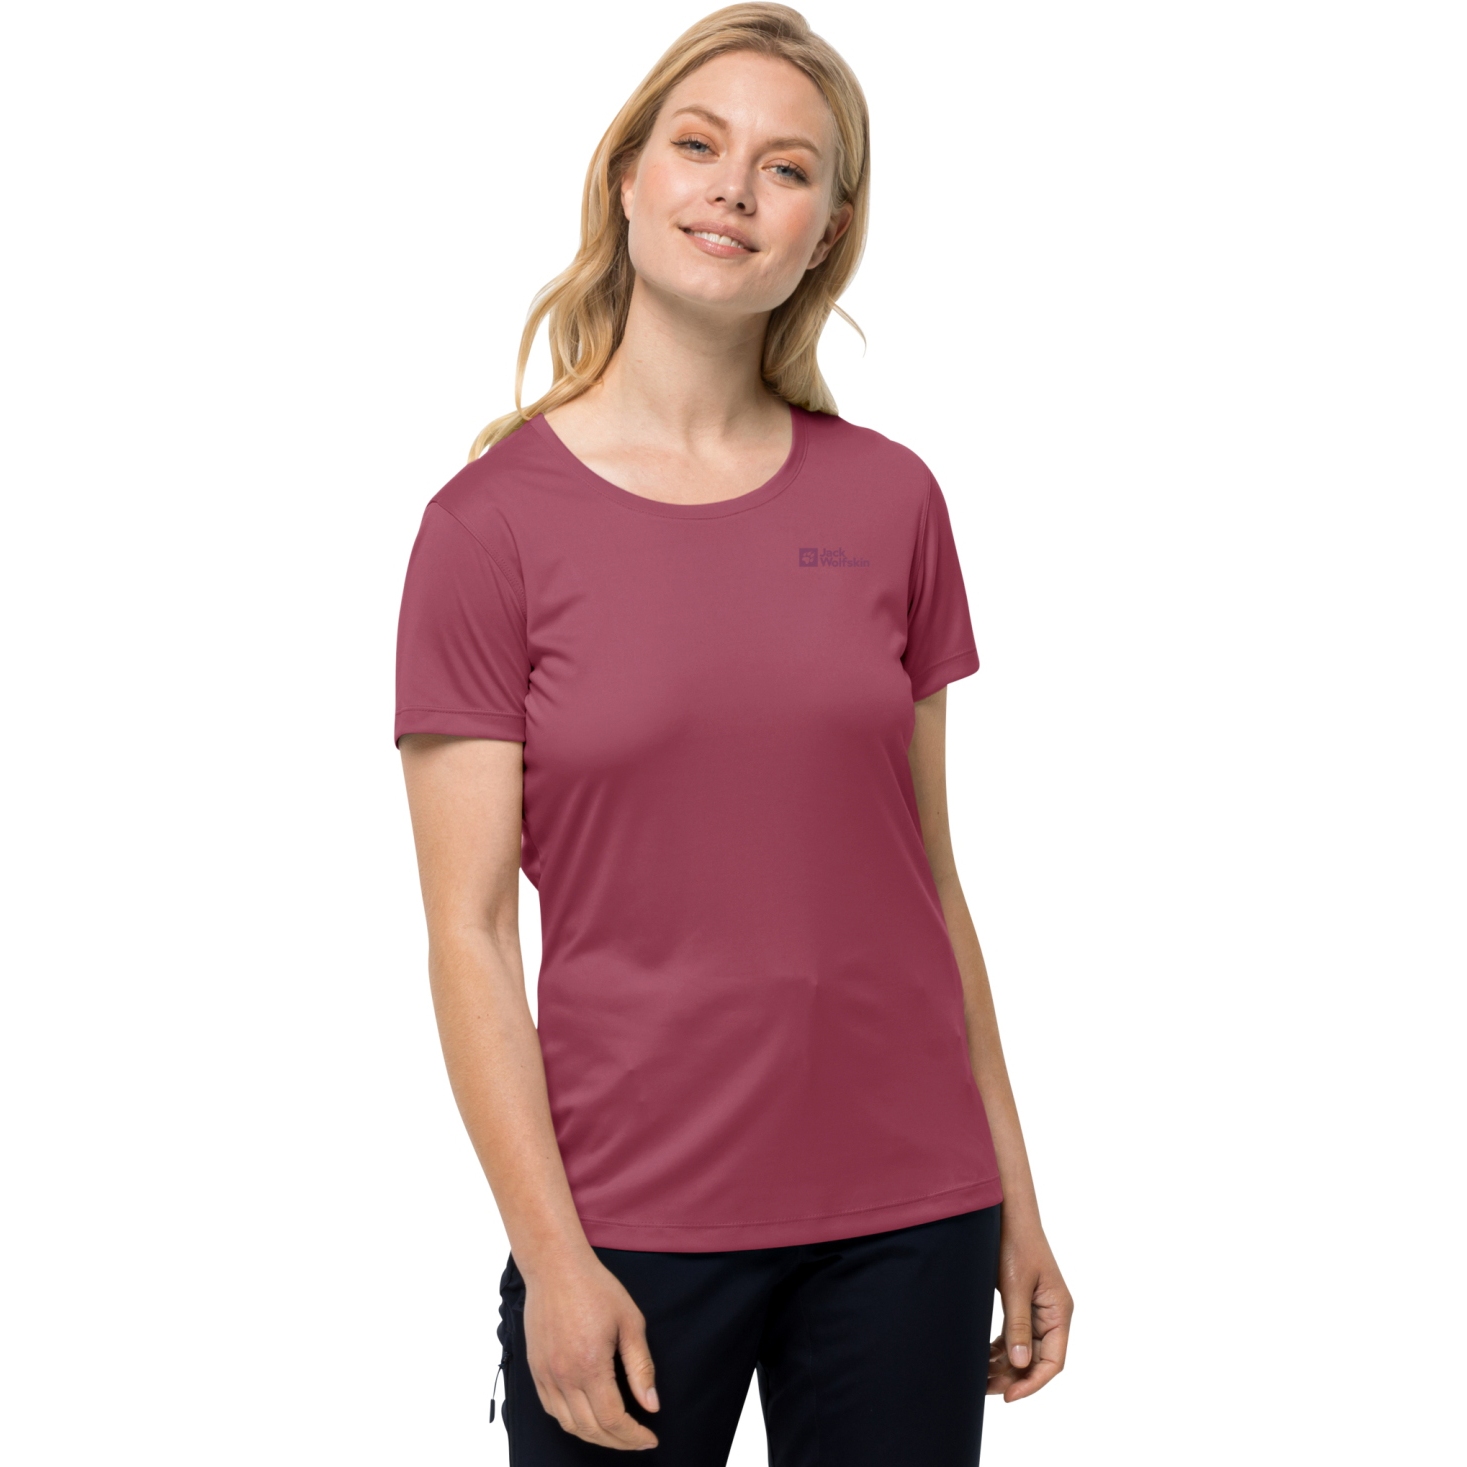 Picture of Jack Wolfskin Tech T-Shirt Women - sangria red